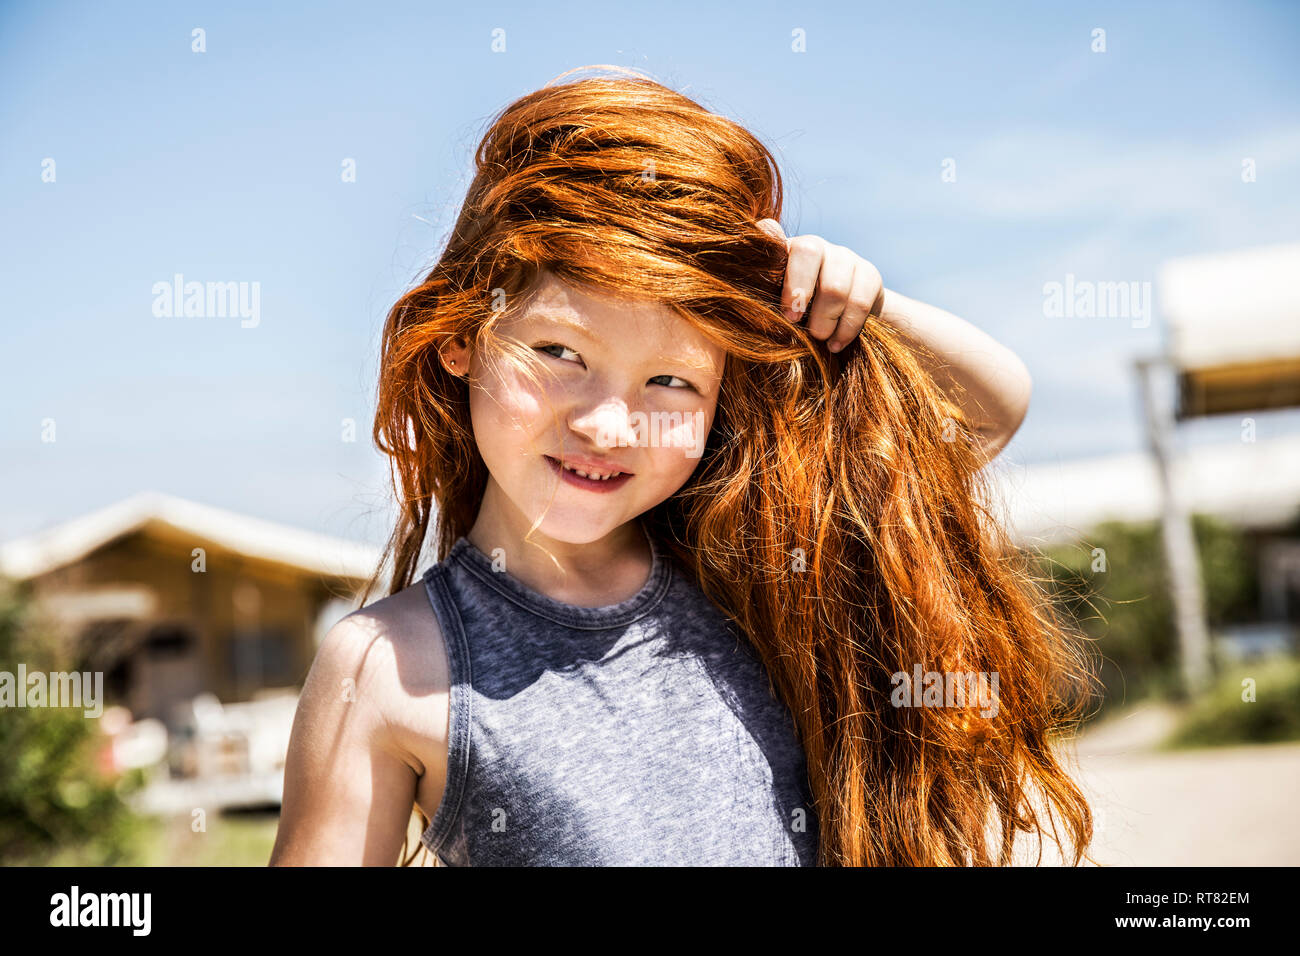 Portrait of a girl with long red hair Stock Photo